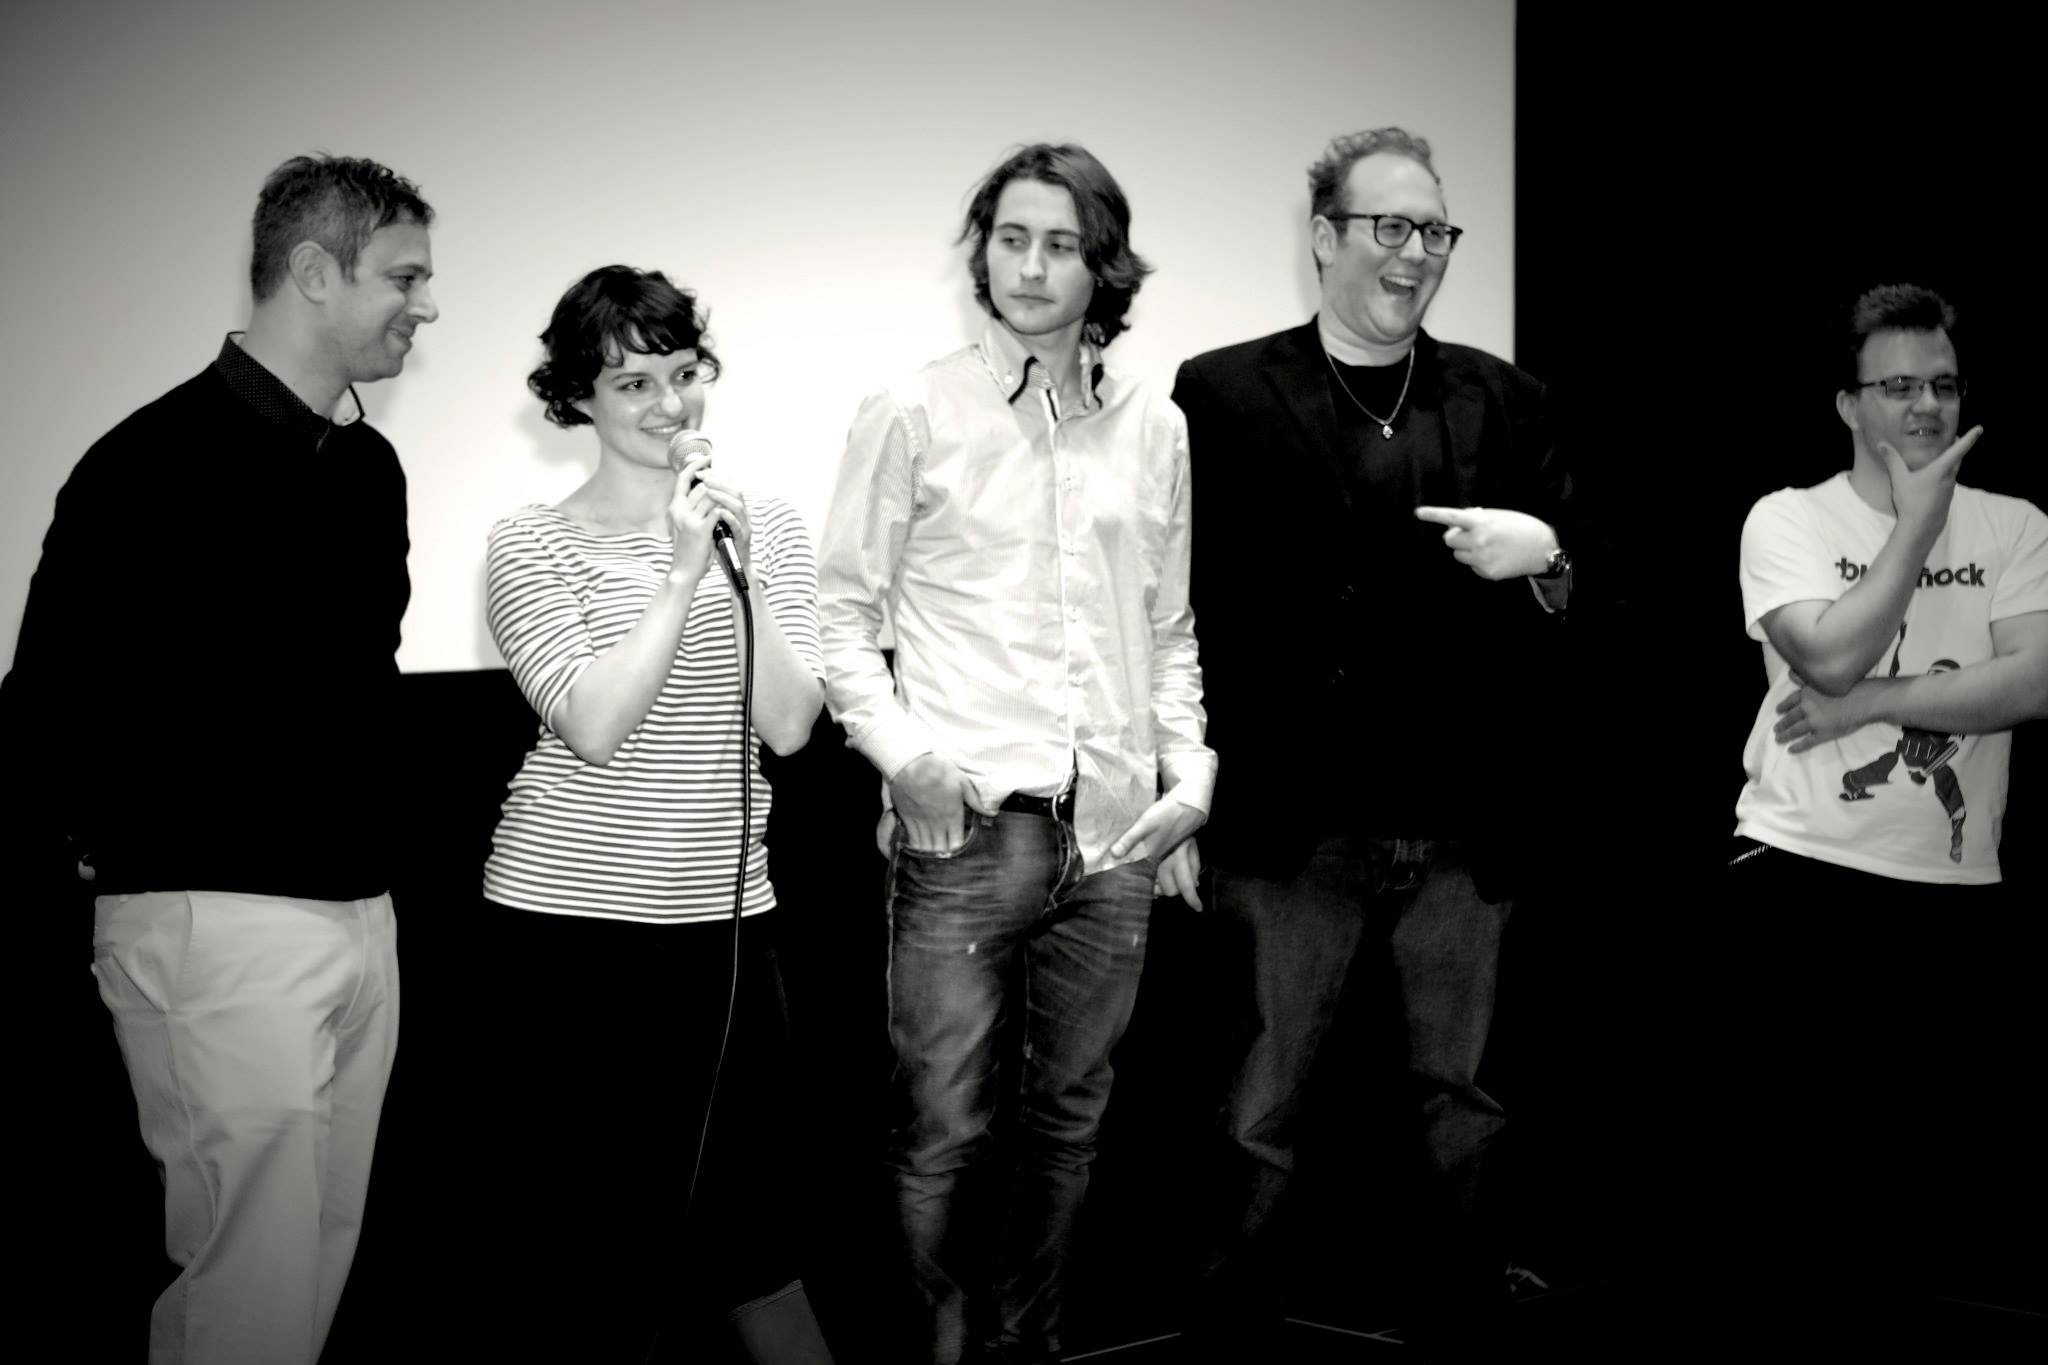 Picture taken at the Q and A after the world premiere of 'Personal Space'. (from the left) Elli Raynai, Stephanie Seaton, Terry J. Tyler, James McDougall, Patrick House